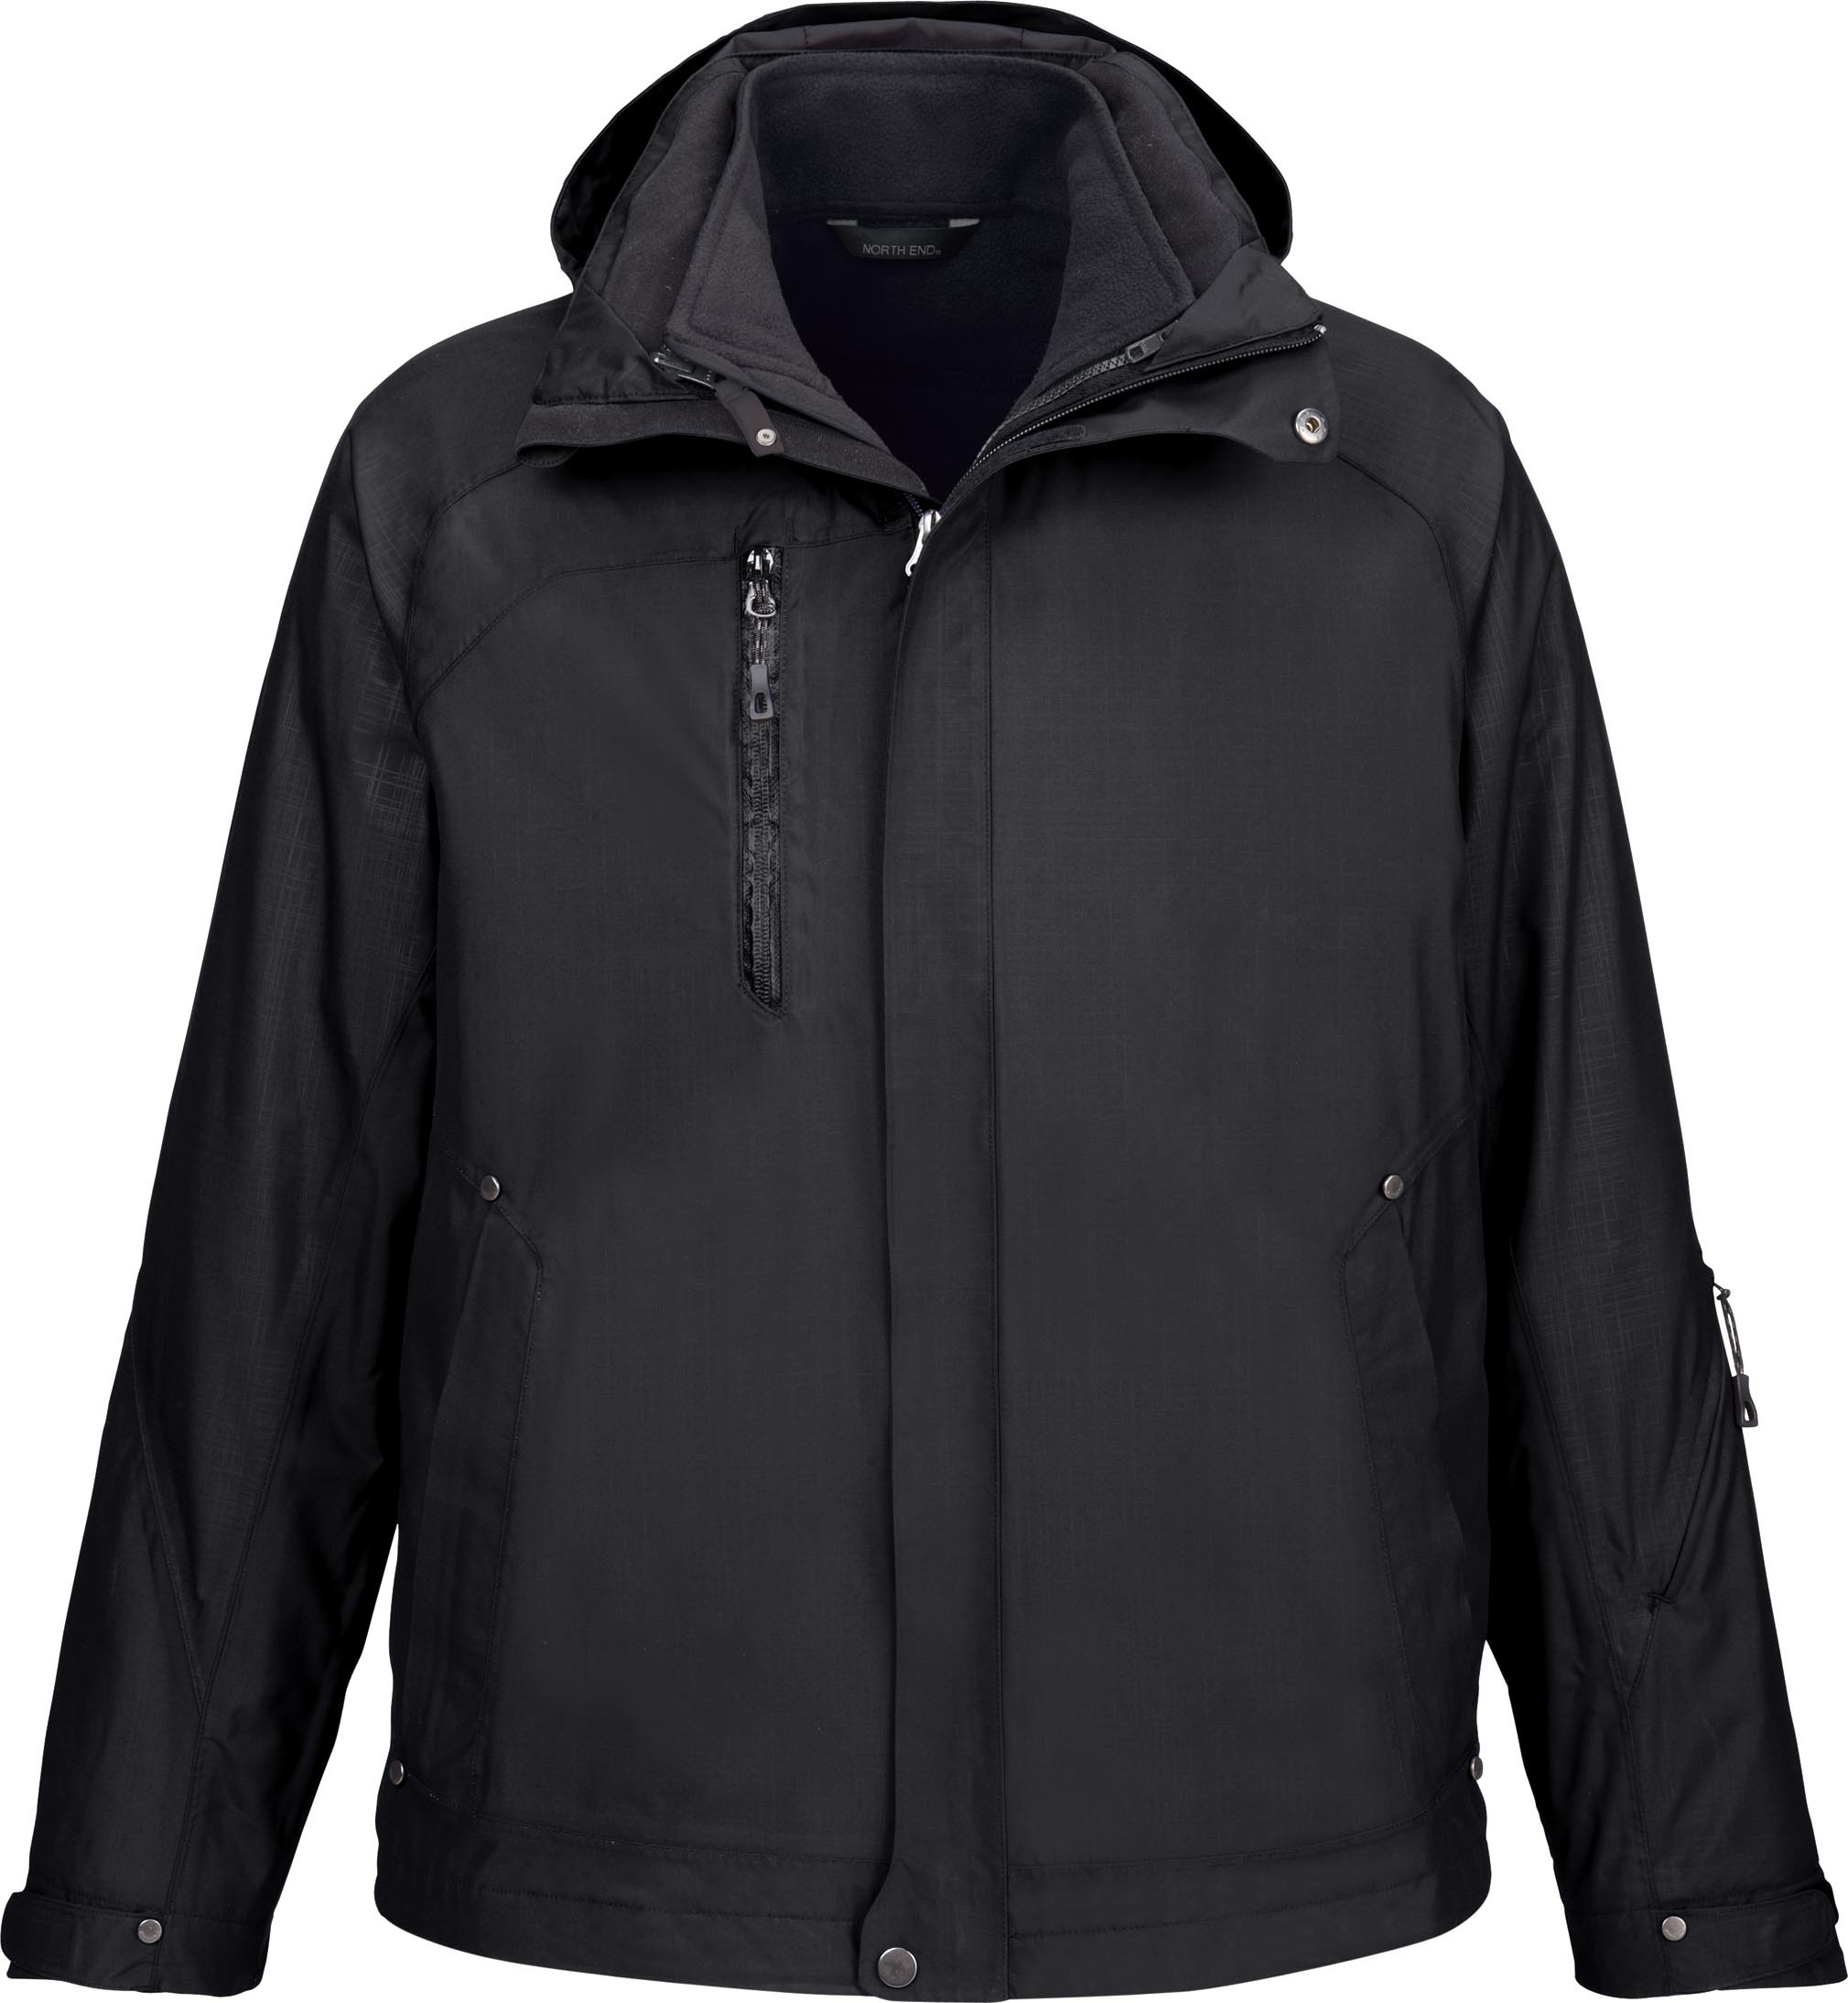 North End 88178 - Men's Caprice 3-In-1 Jacket With Soft Shell Liner ...